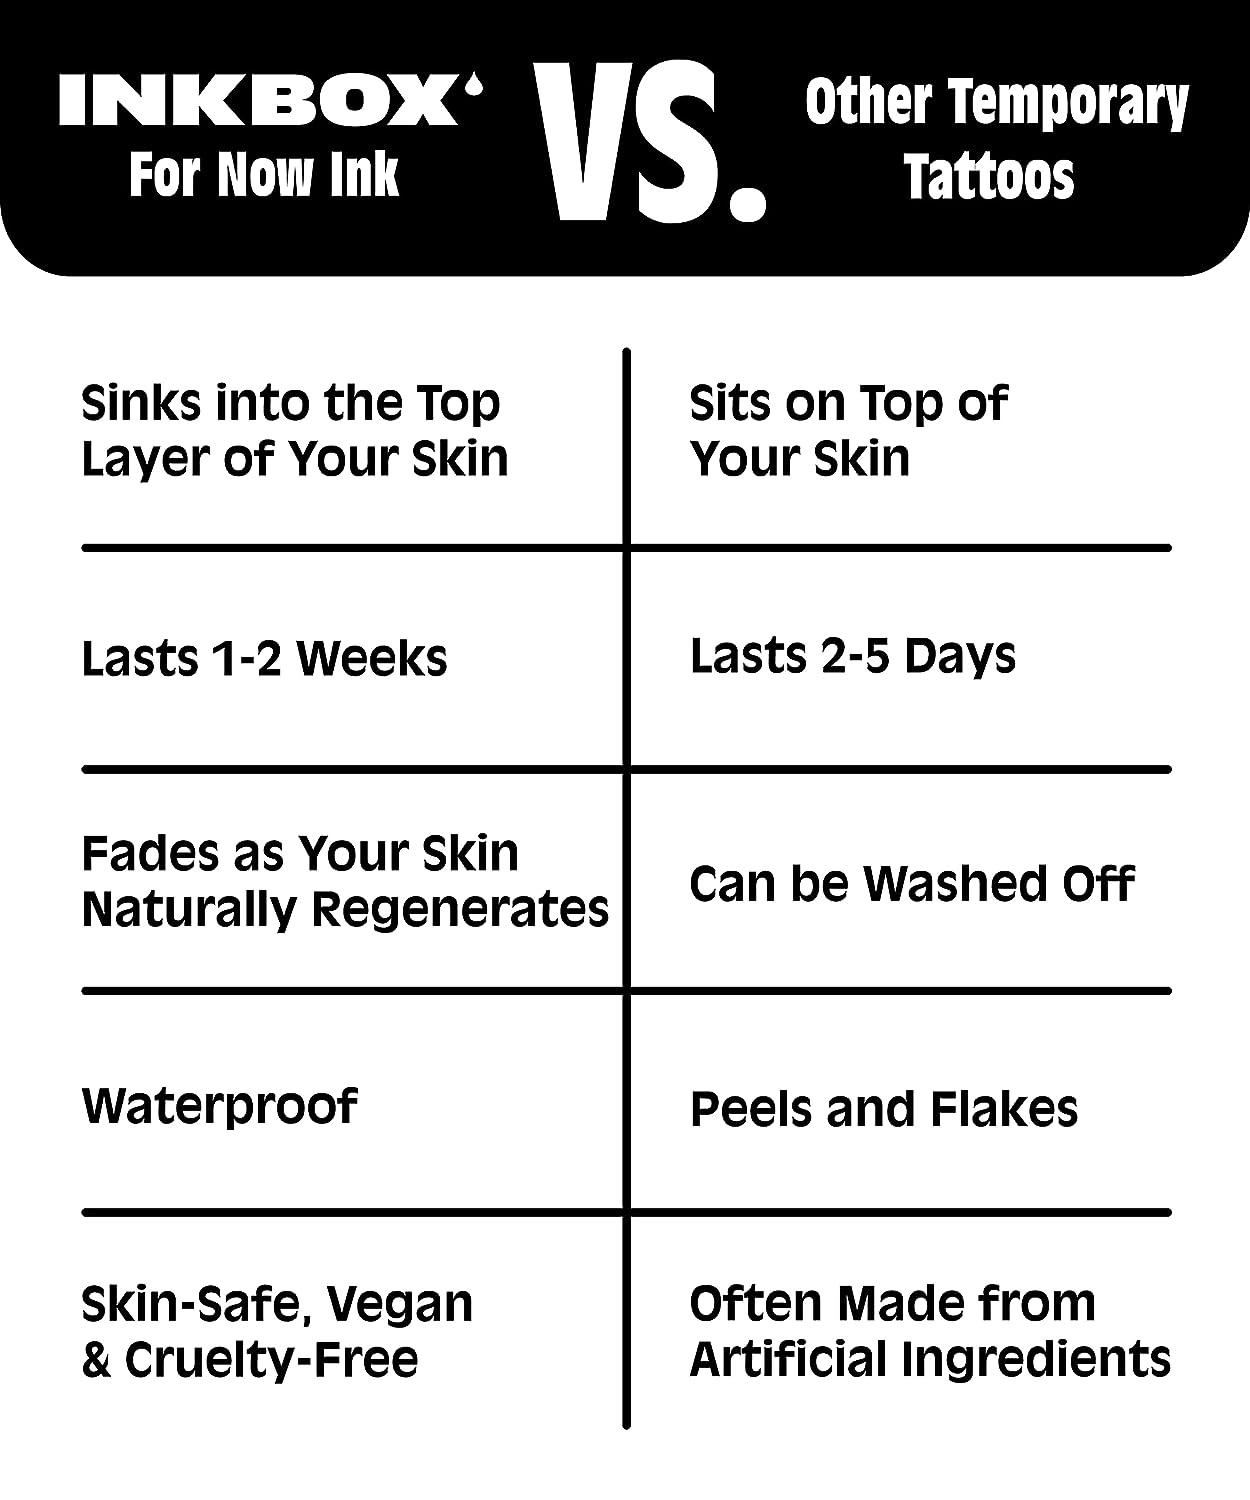 Lavish Semi-Permanent Tattoo. Lasts 1-2 weeks. Painless and easy to apply.  Organic ink. Browse more or create your own., Inkbox™